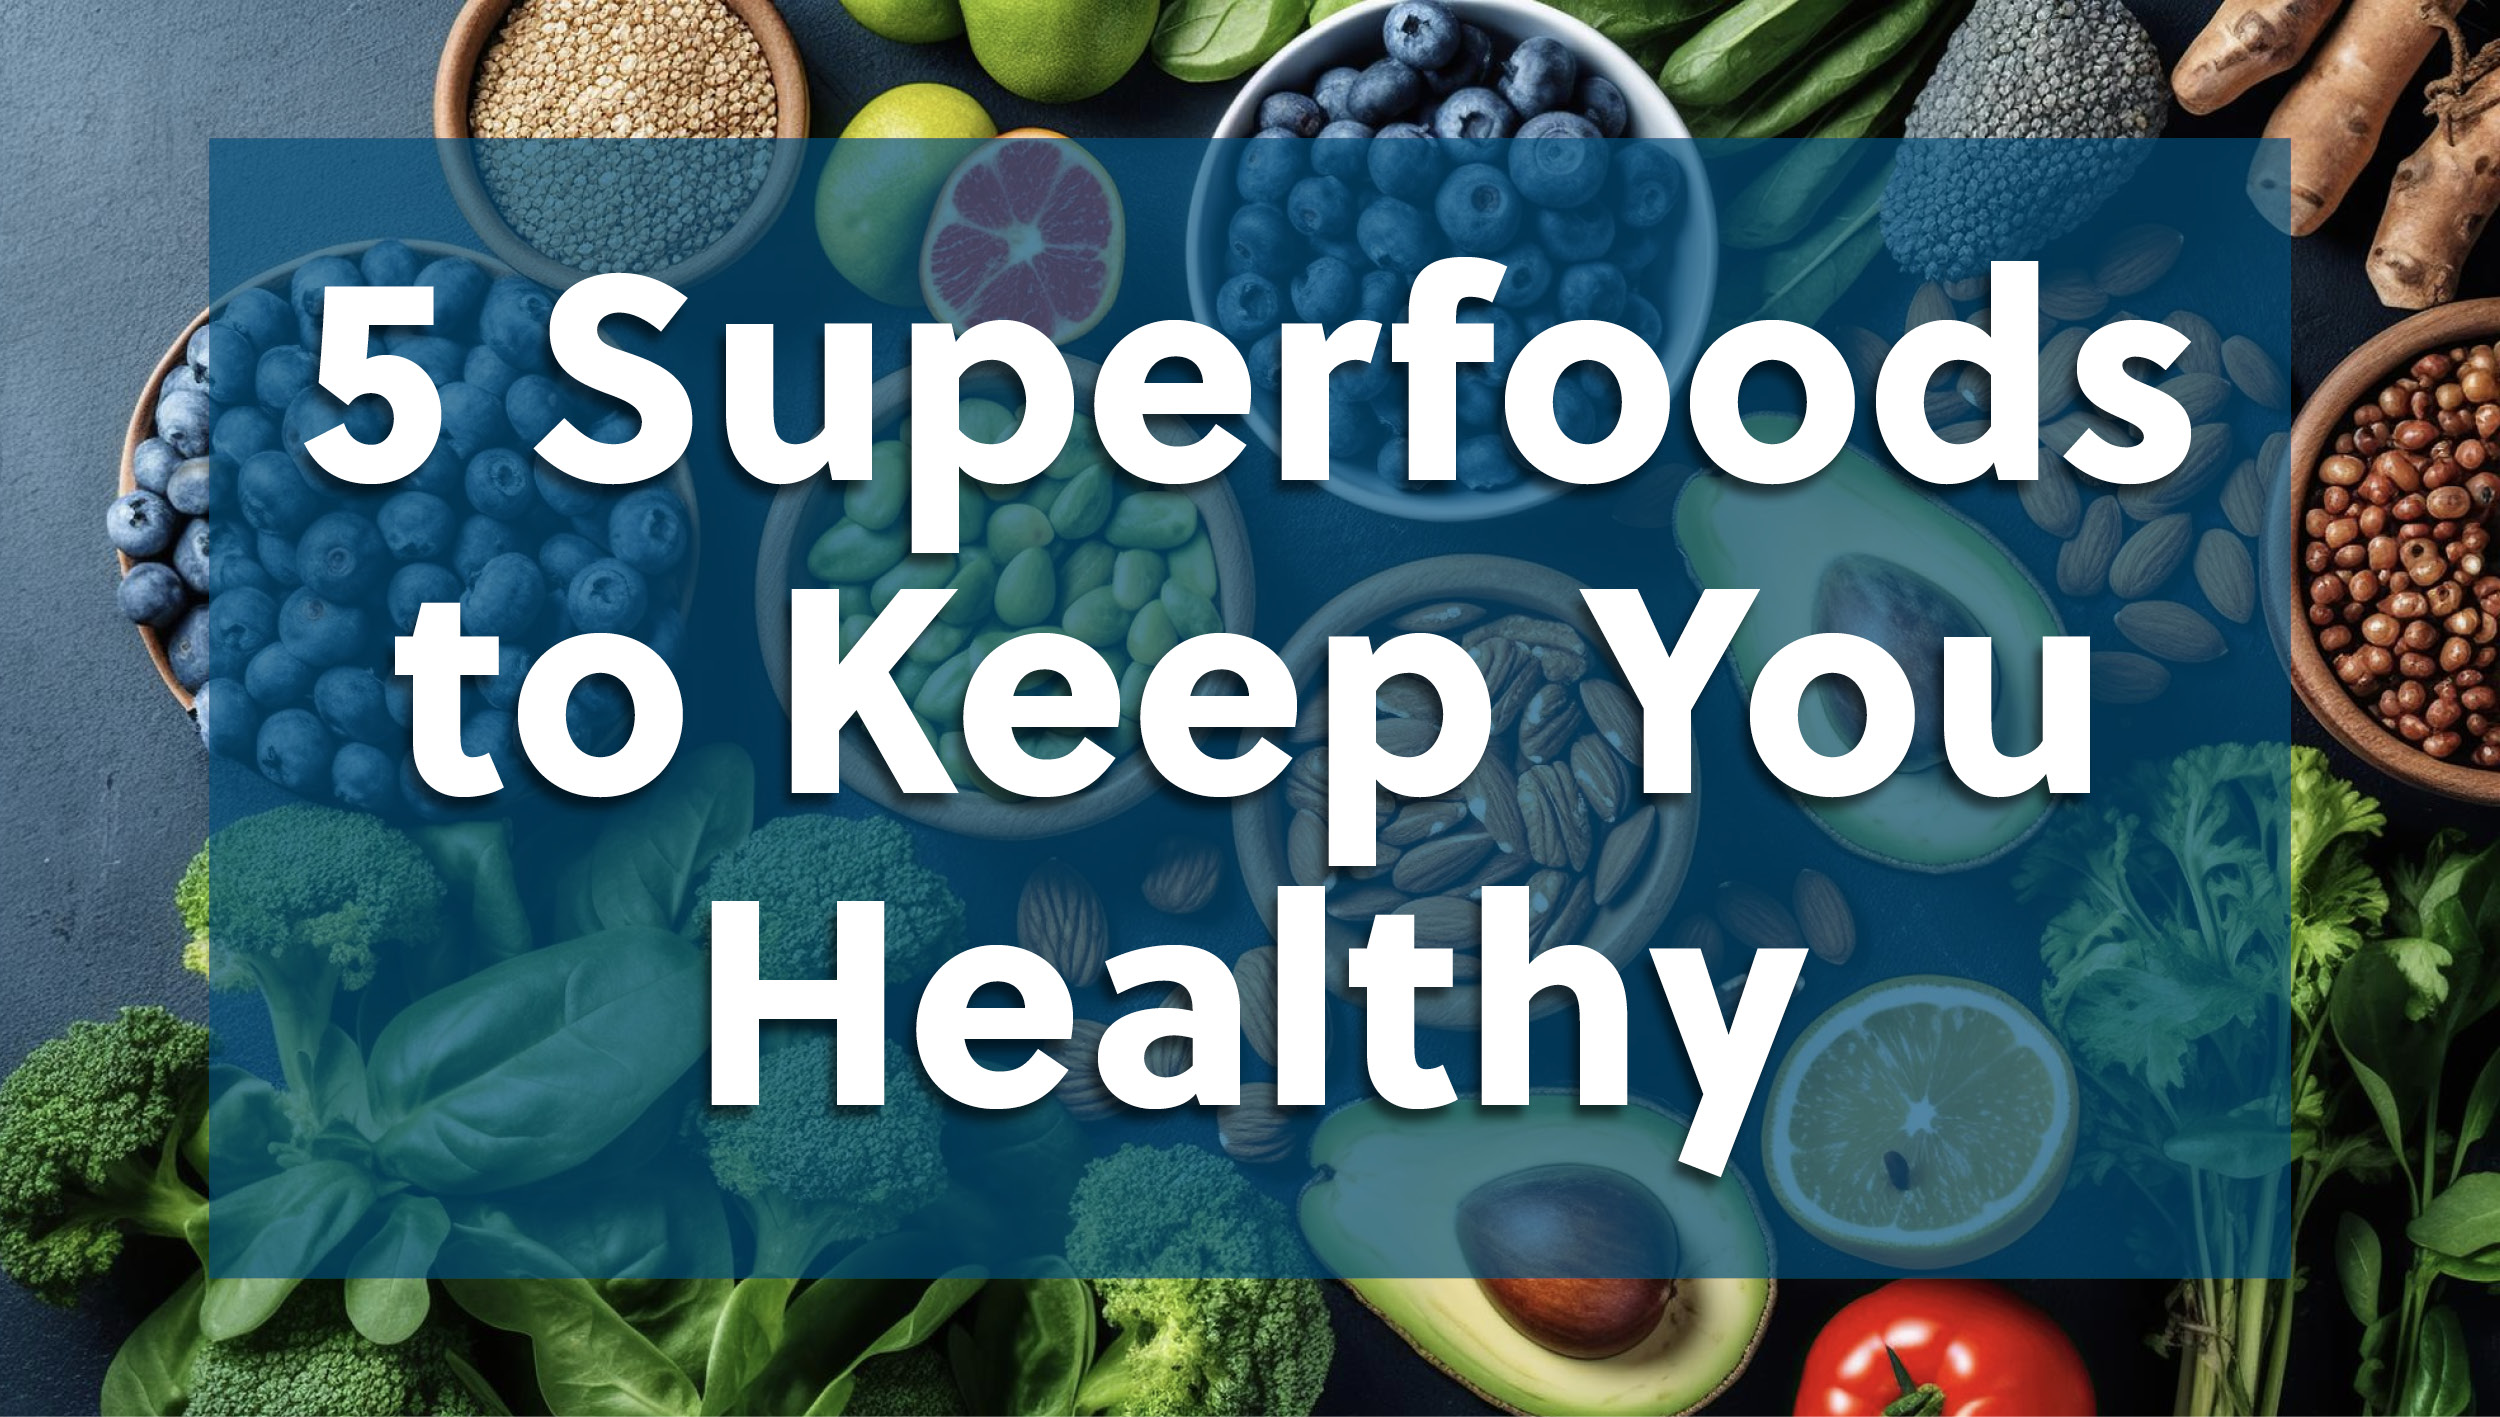 Nourish Your Brain: 5 Superfoods to Keep You Healthy